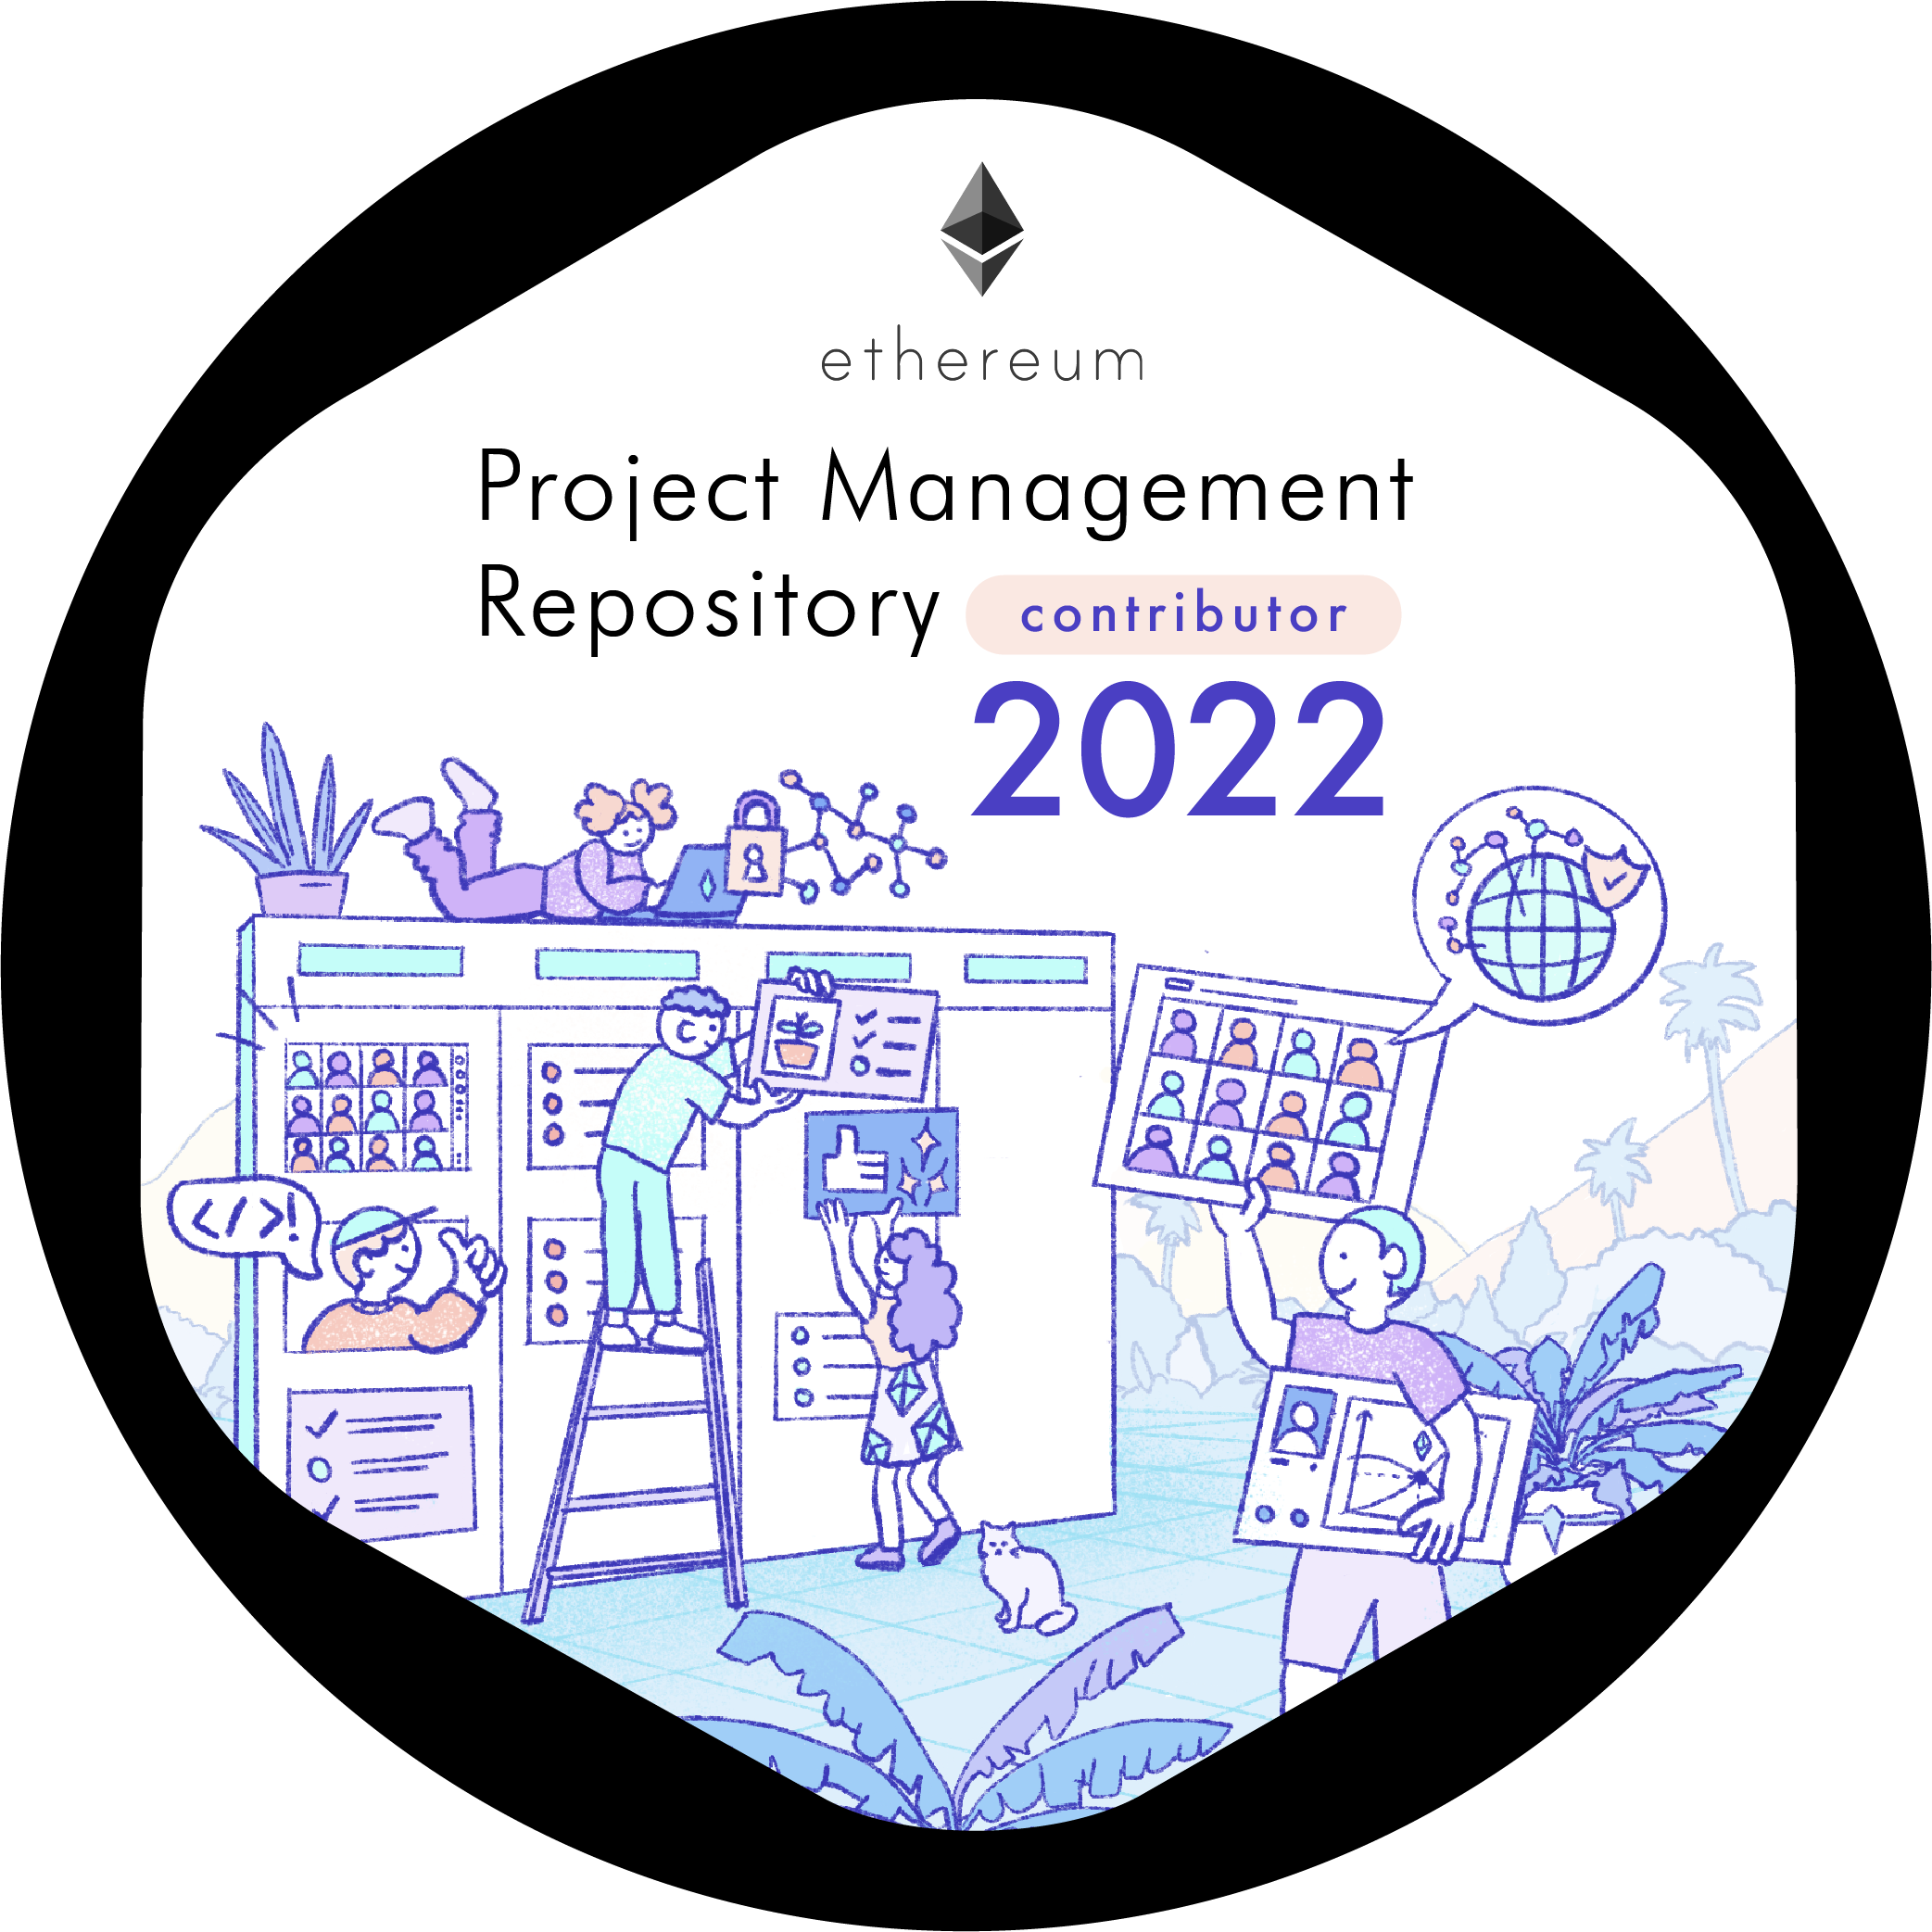 2022 Ethereum Project Management Repo Contributor